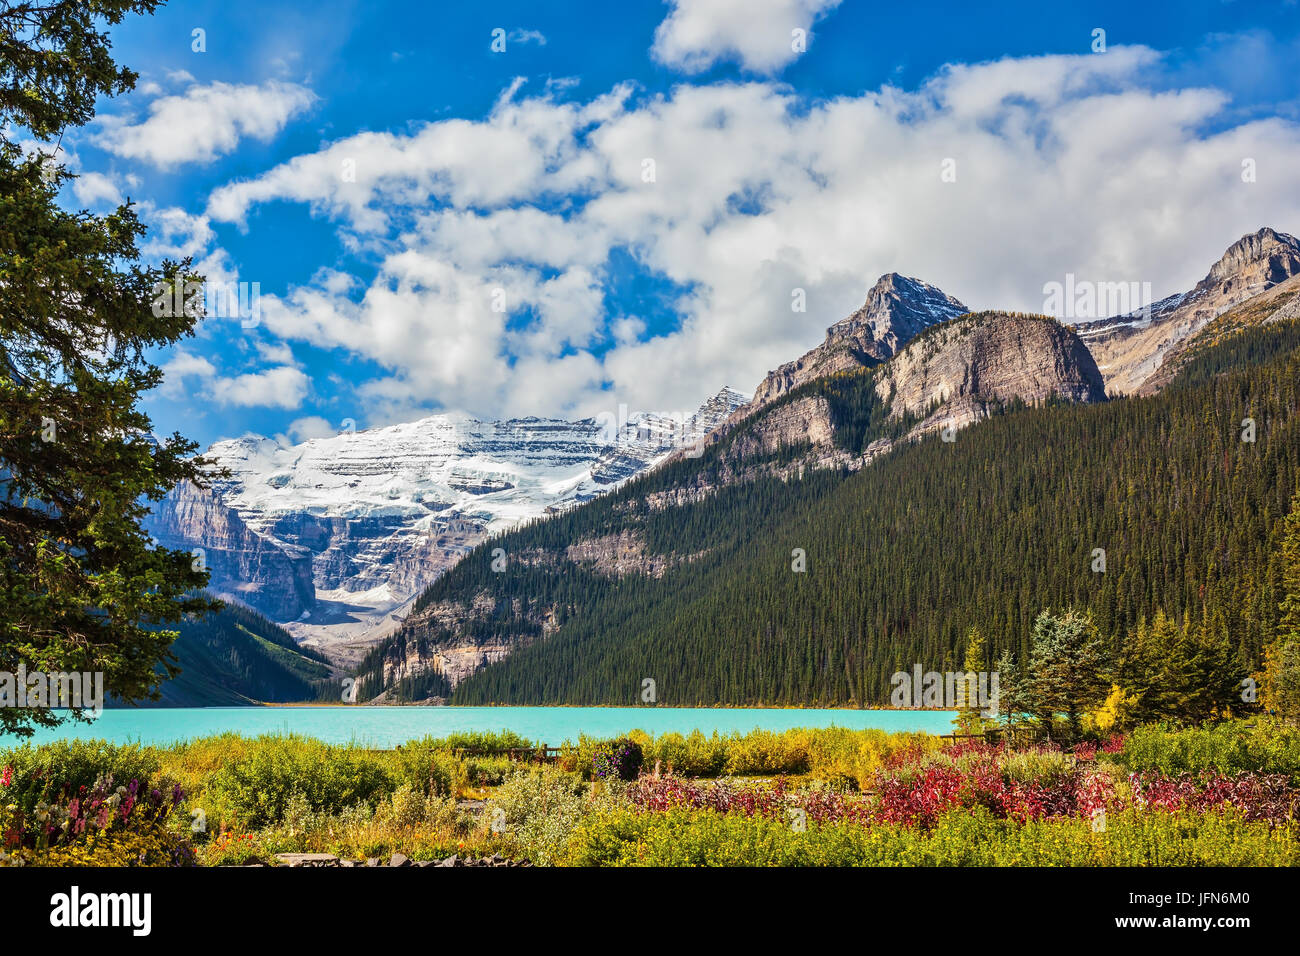 The picturesque promenade on glacial Lake Louise Stock Photo